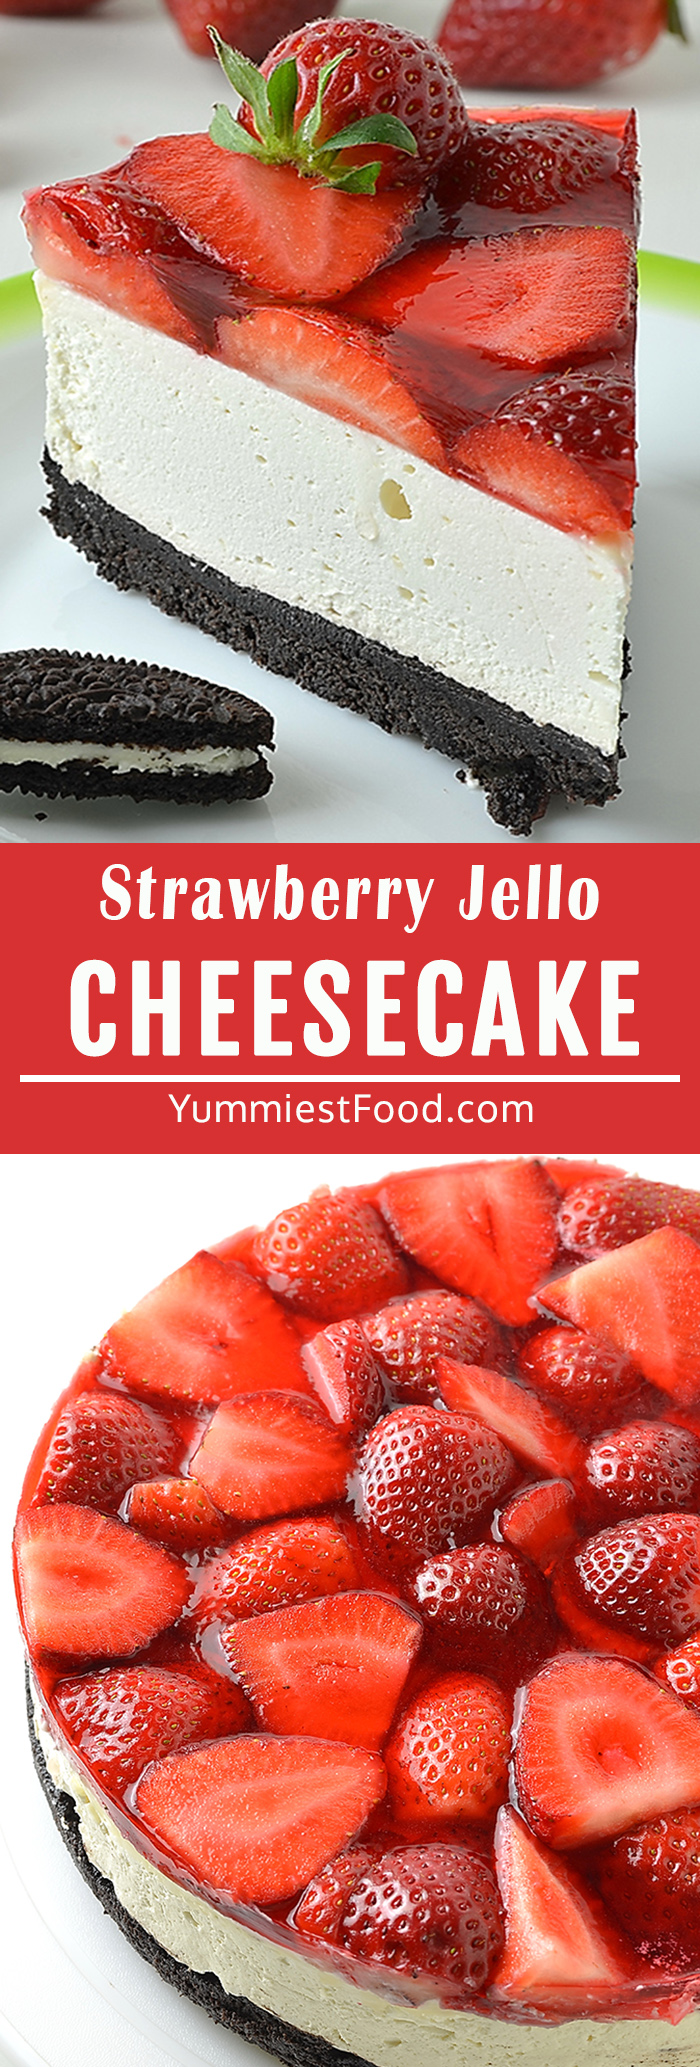 Strawberry Jello Cheesecake is creamy, delicious, and such an easy dessert to make! This no-bake cheesecake recipe is made with an Oreo cookie crust, a cream cheese filling, and fresh strawberries with a Jello layer on top!